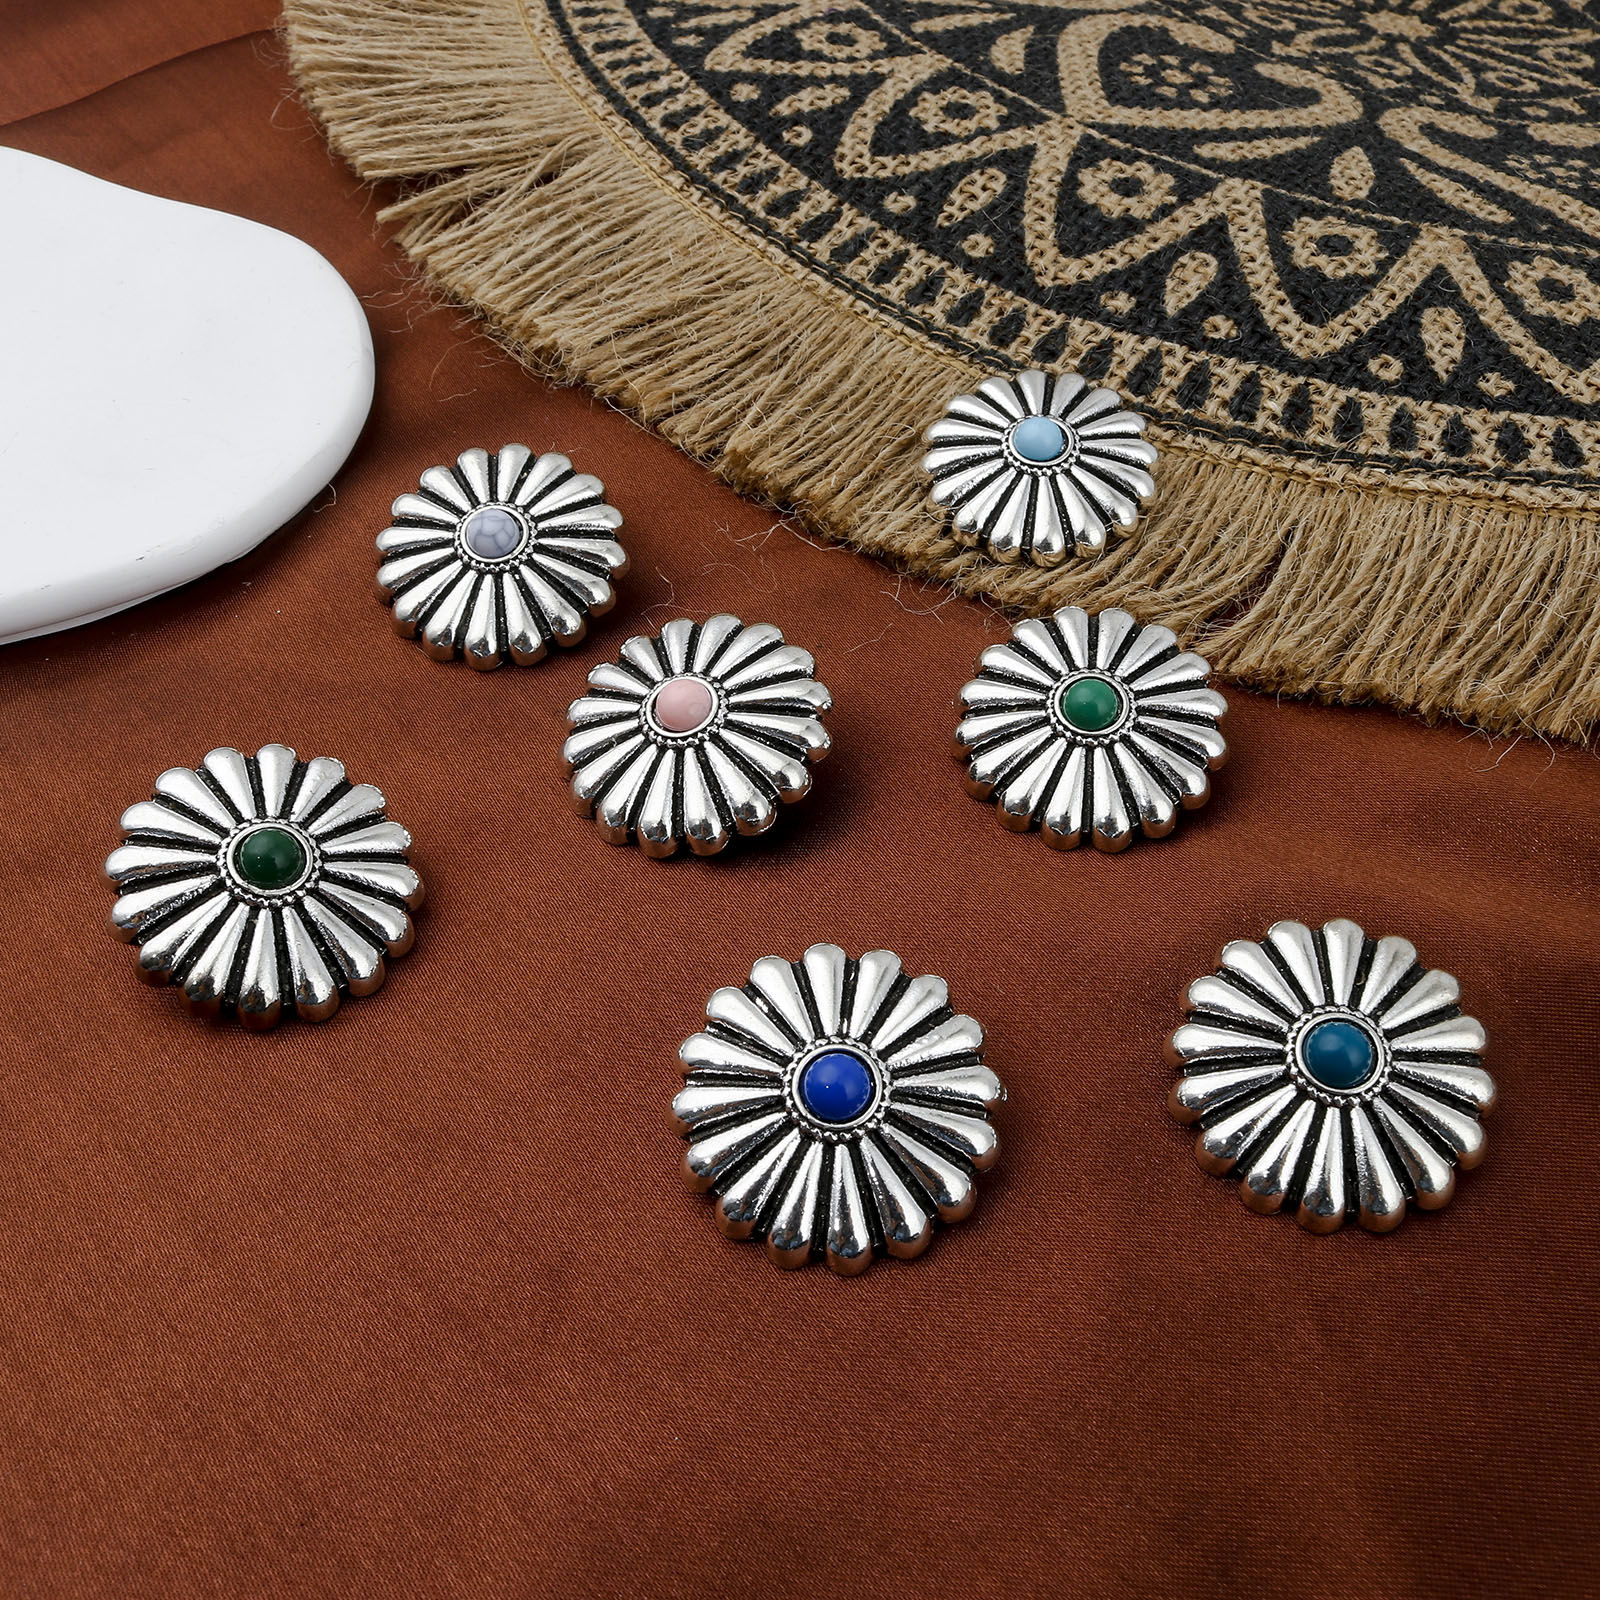 Image de Zinc Based Alloy Boho Chic Bohemia Metal Sewing Shank Buttons Buttons Single Hole Flower Leaves Antique Silver Color Multicolor With Resin Cabochons Imitation Turquoise 29mm x 29mm, 3 PCs